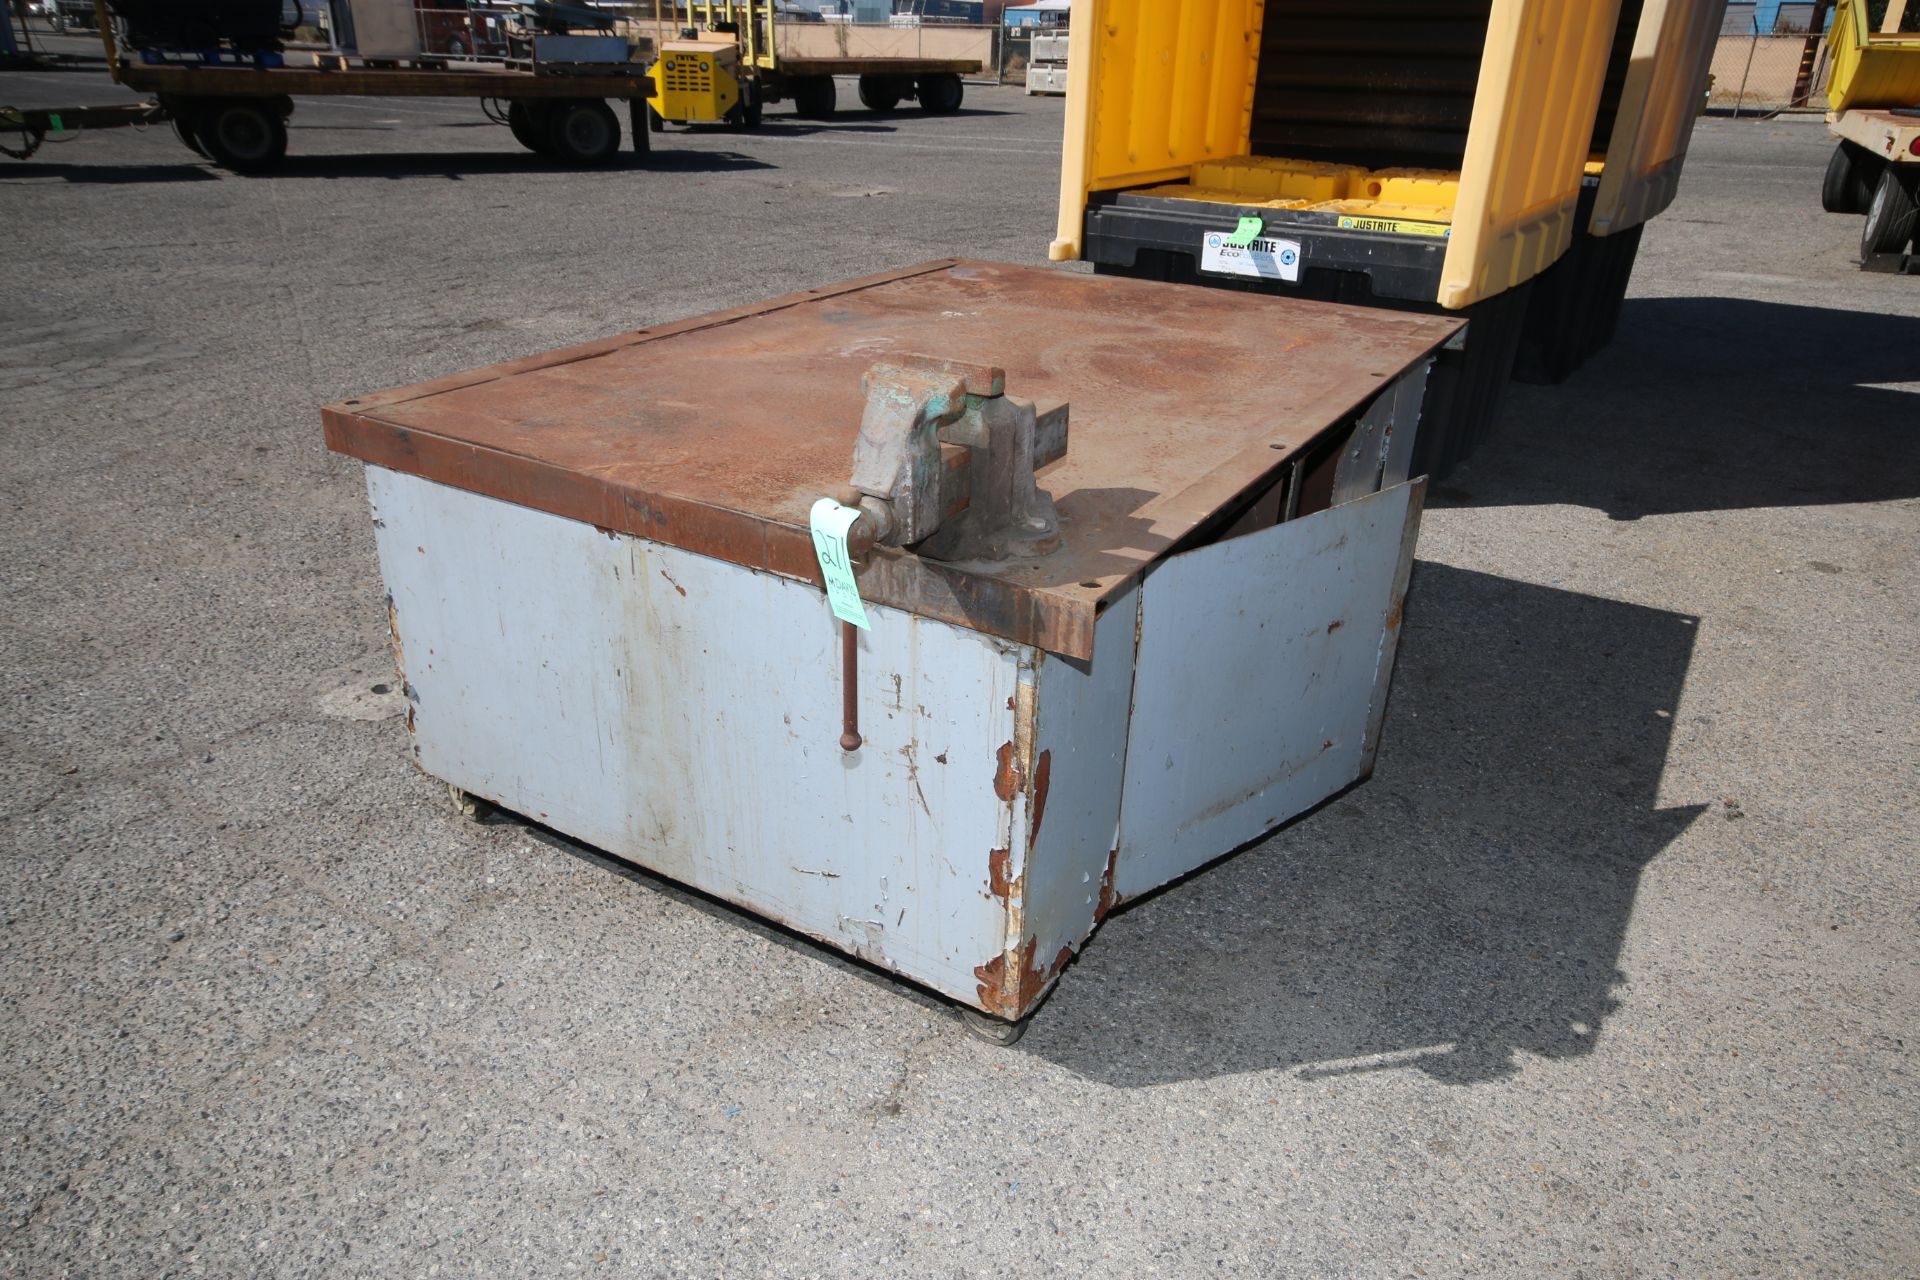 Metal Shop Table with Vise, Overall Dims.: Aprox. 58" L x 58" W x 34" H, Mounted on Portable Casters